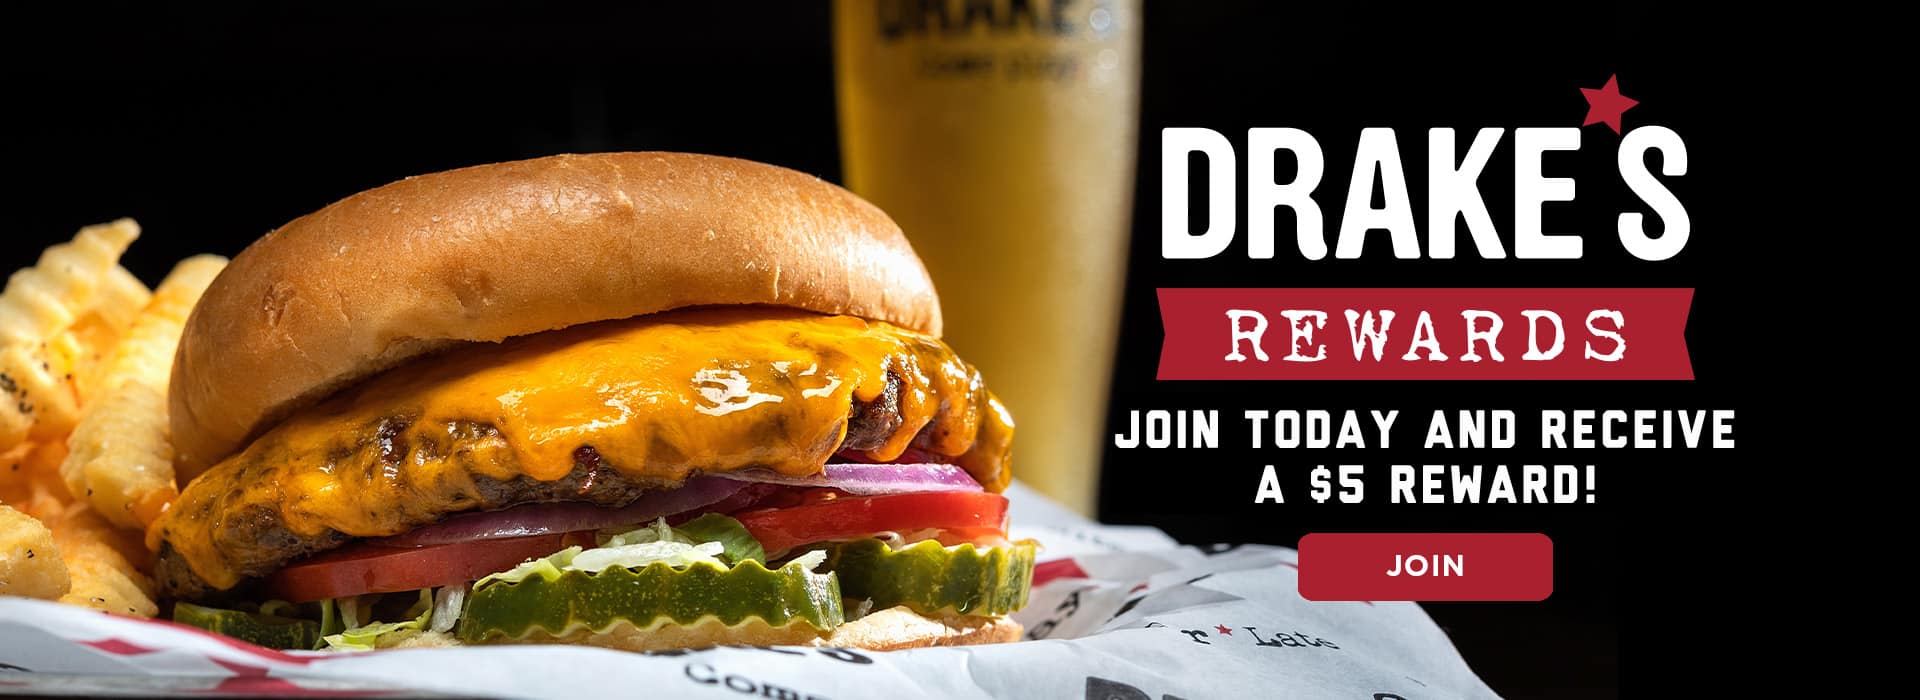 Drake's Rewards - Join today and receive a $5 reward! Click or tap here to join!